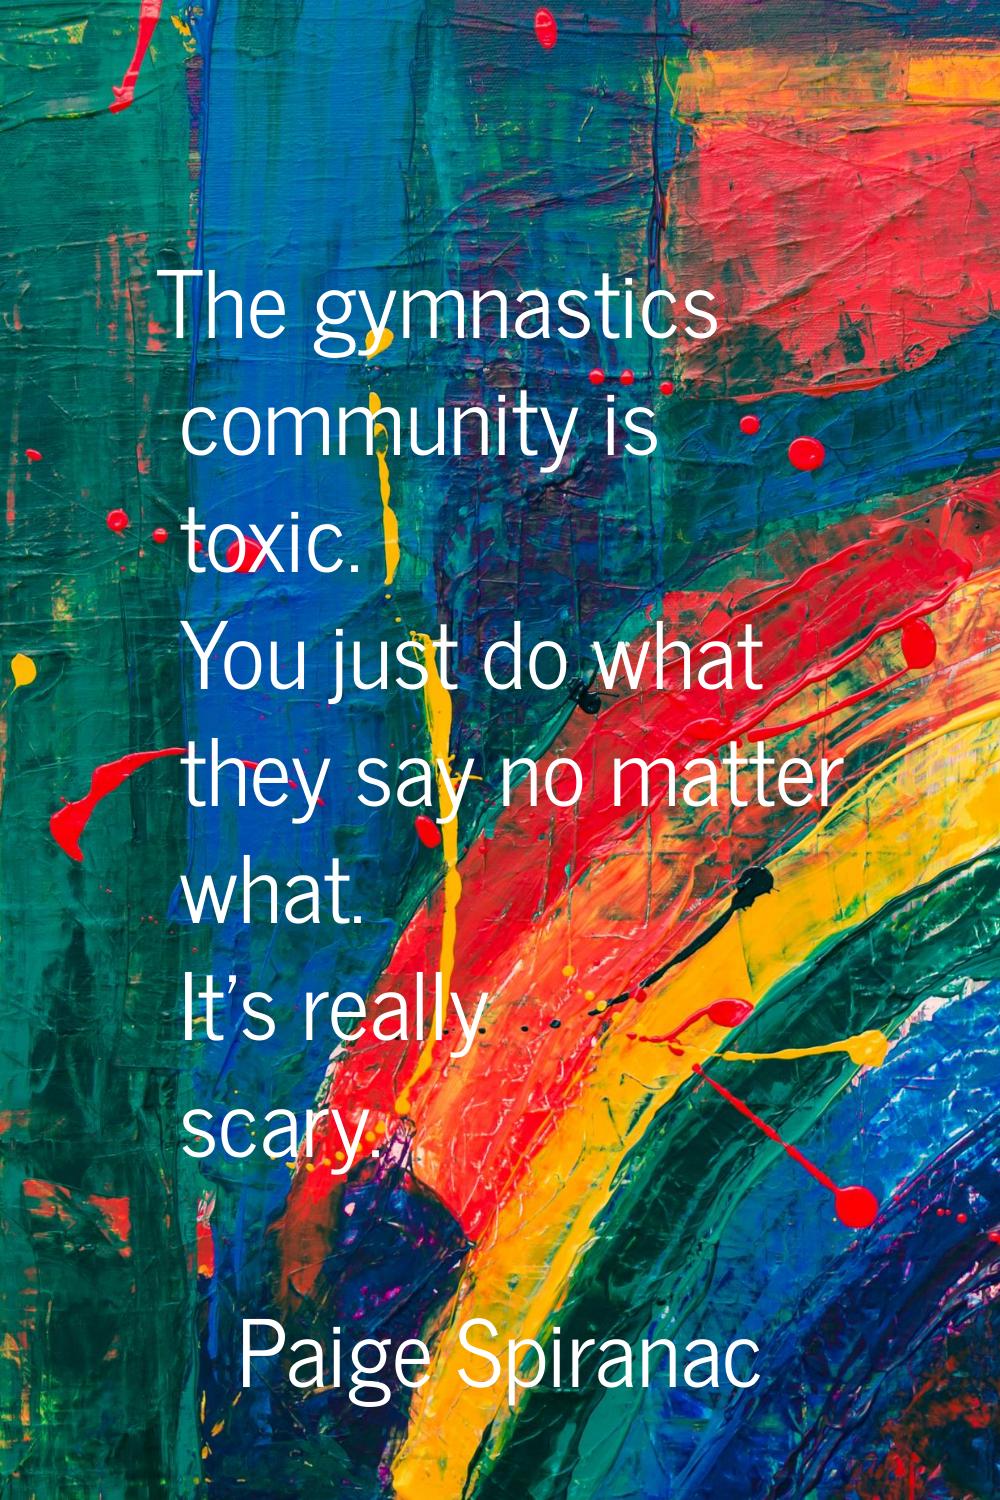 The gymnastics community is toxic. You just do what they say no matter what. It's really scary.